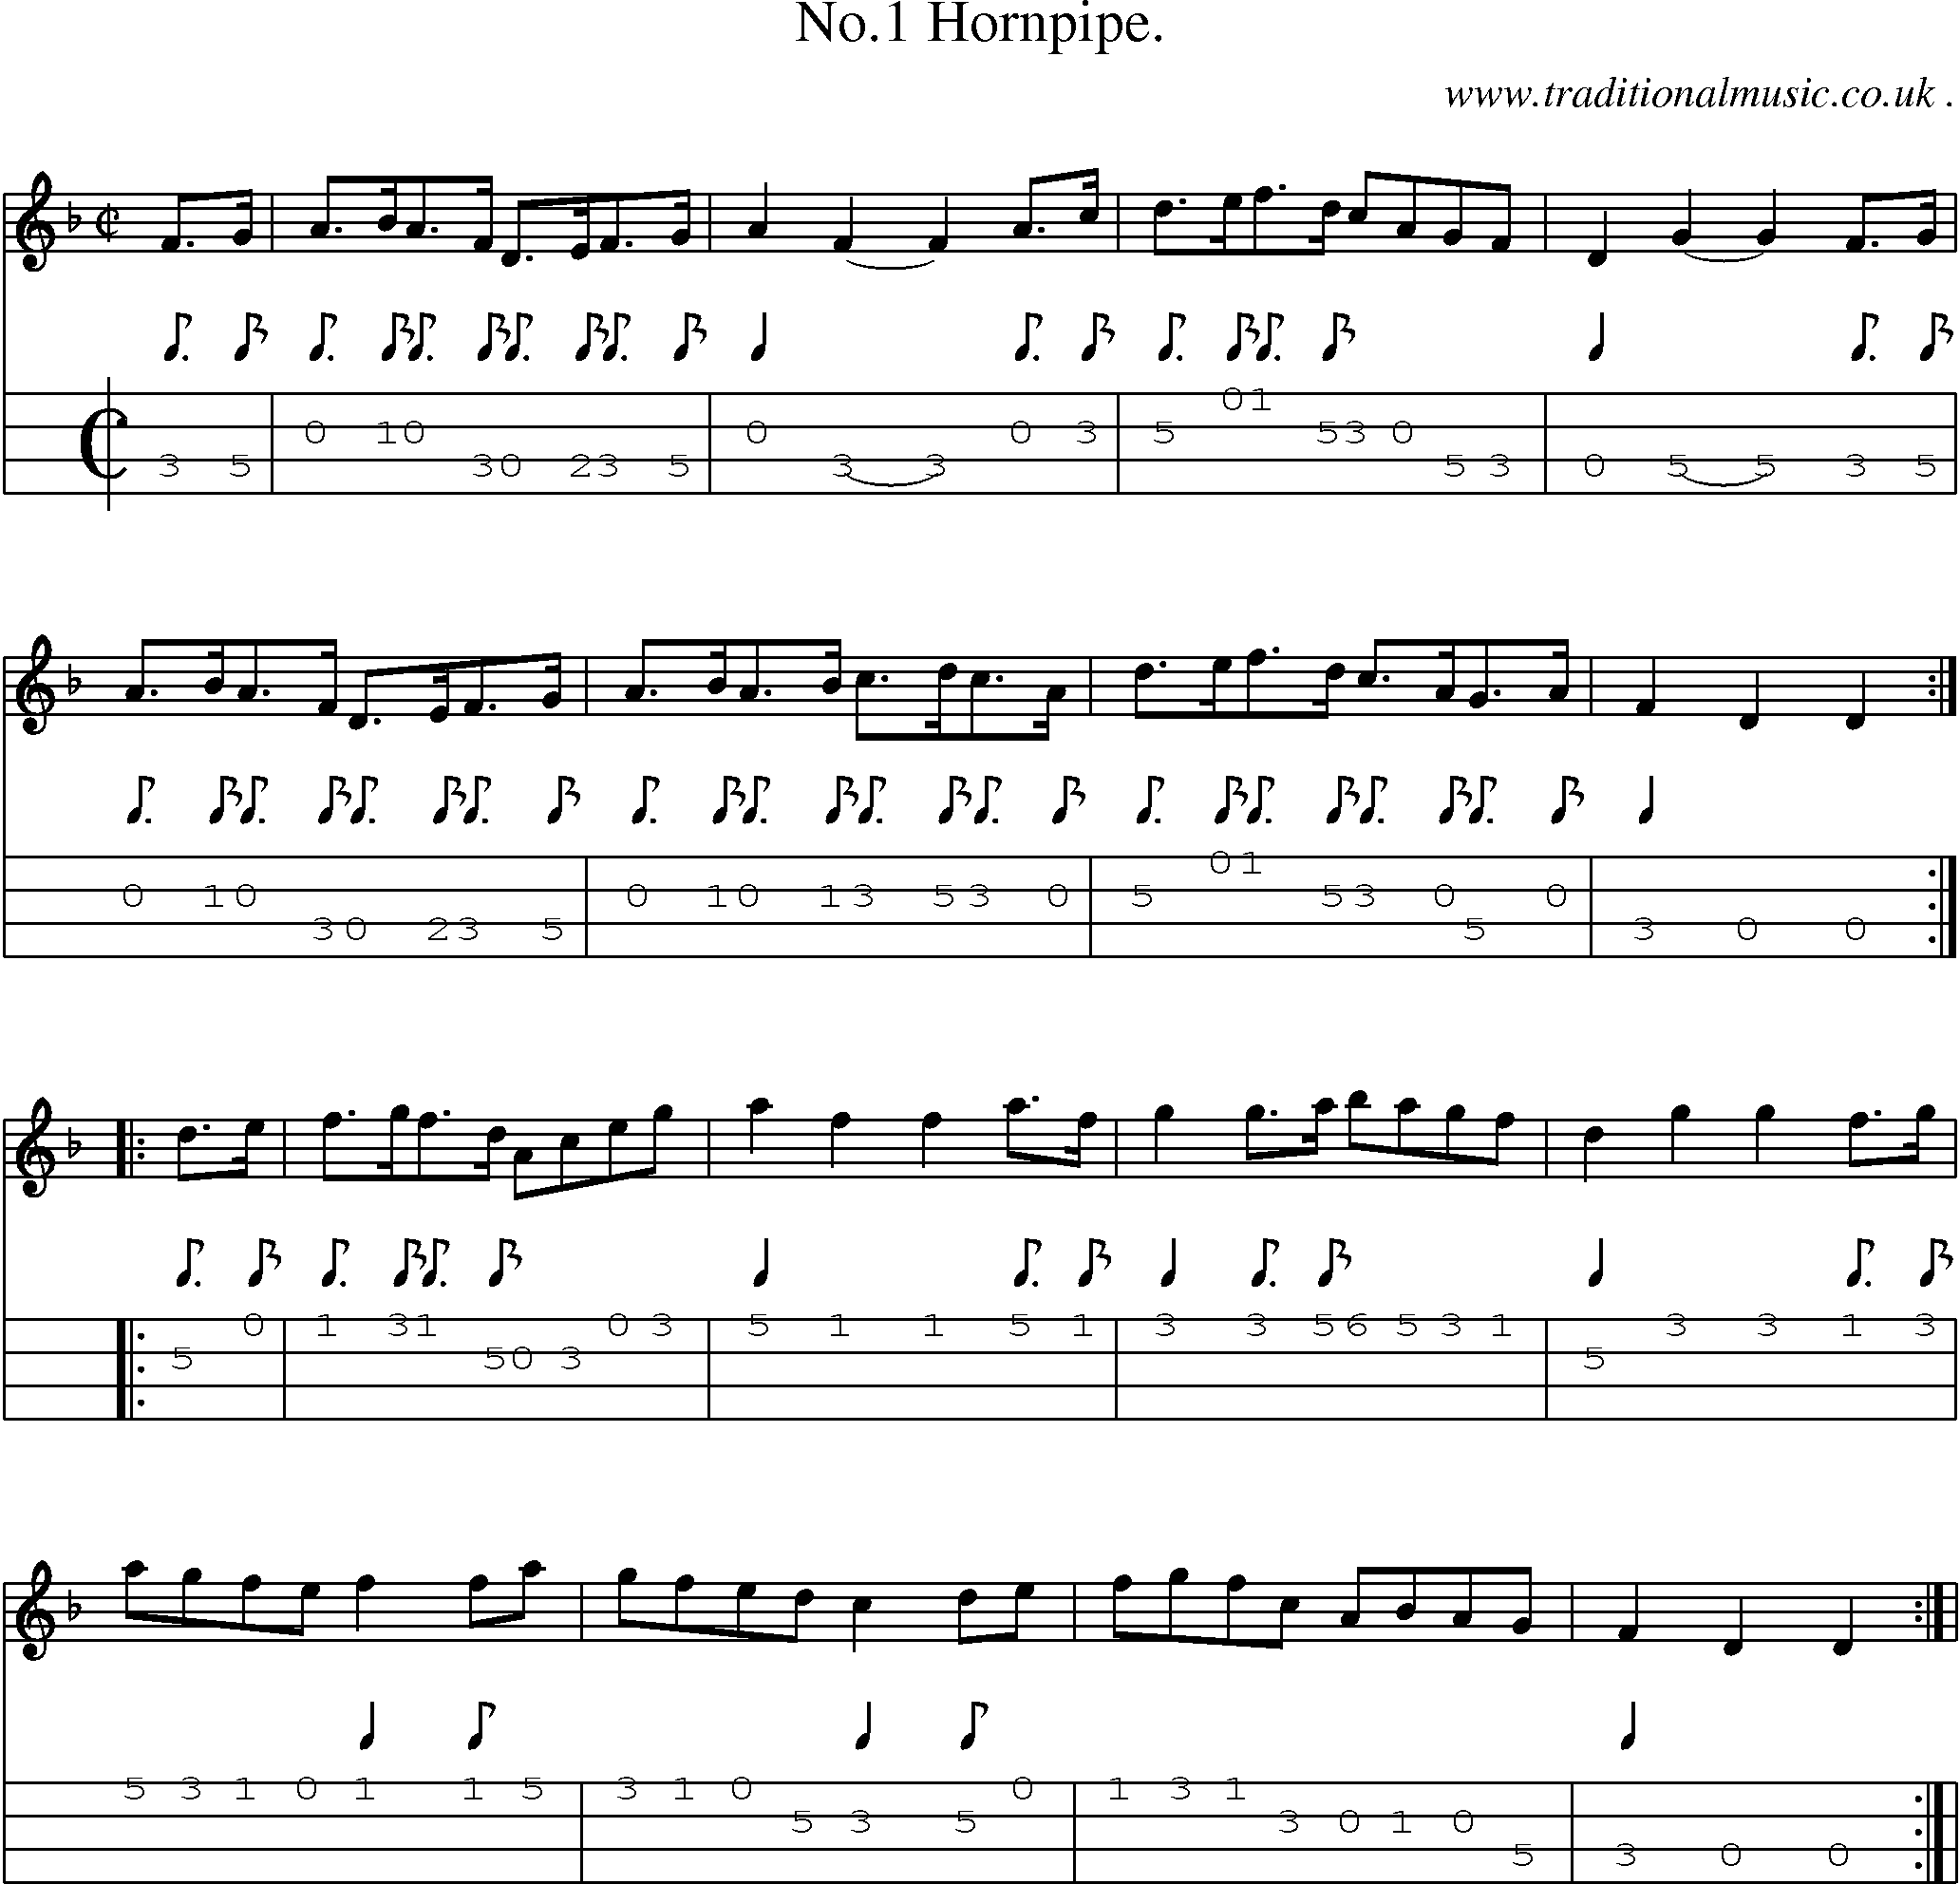 Sheet-Music and Mandolin Tabs for No1 Hornpipe